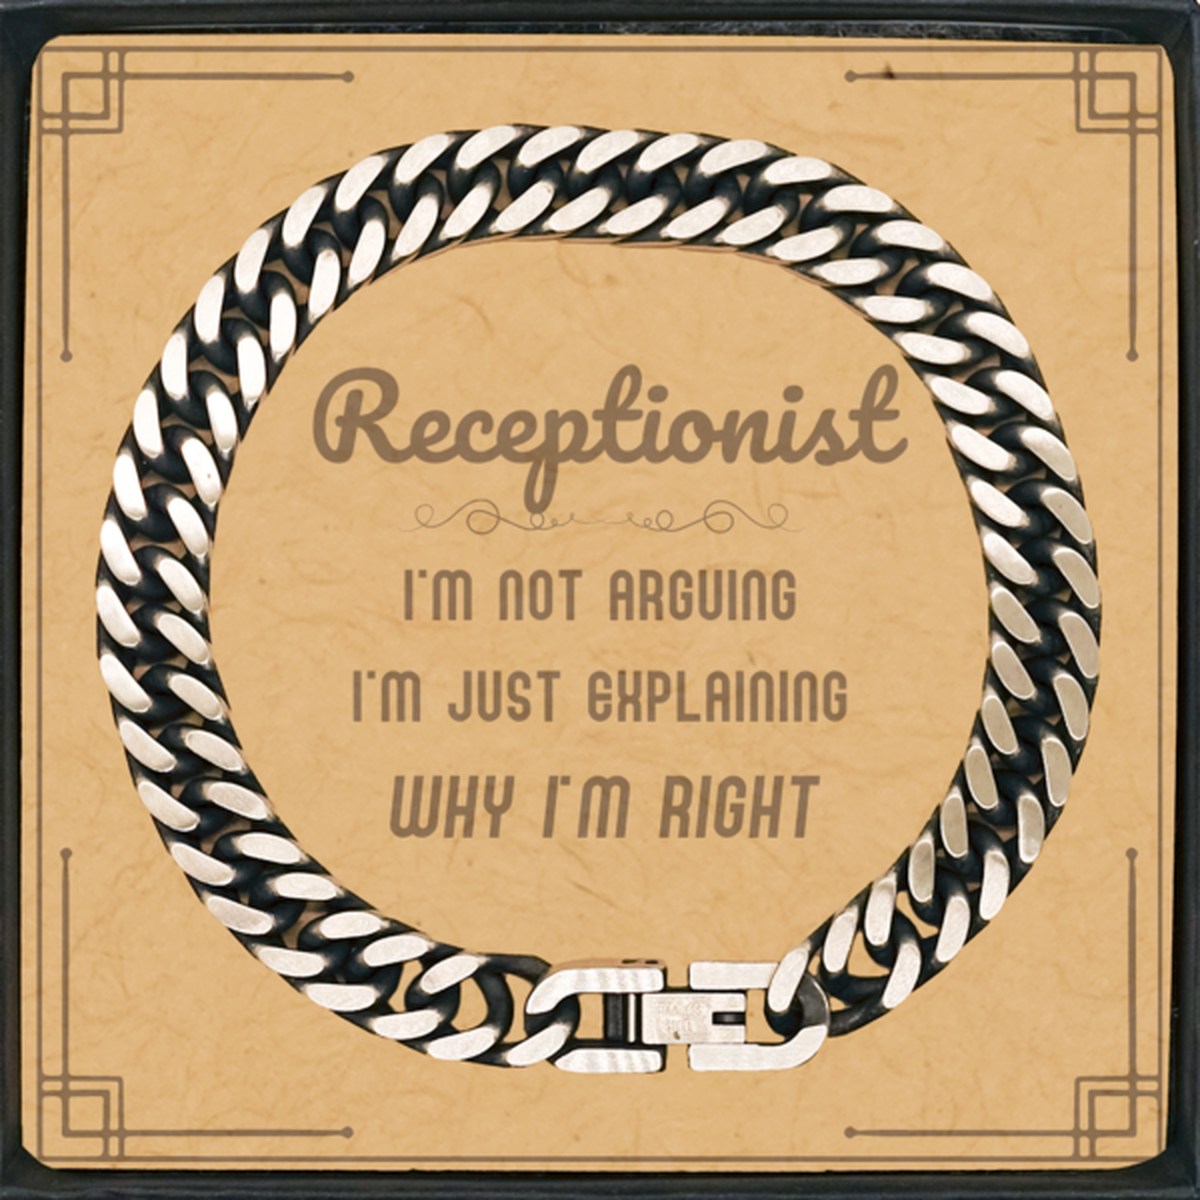 Receptionist I'm not Arguing. I'm Just Explaining Why I'm RIGHT Cuban Link Chain Bracelet, Funny Saying Quote Receptionist Gifts For Receptionist Message Card Graduation Birthday Christmas Gifts for Men Women Coworker